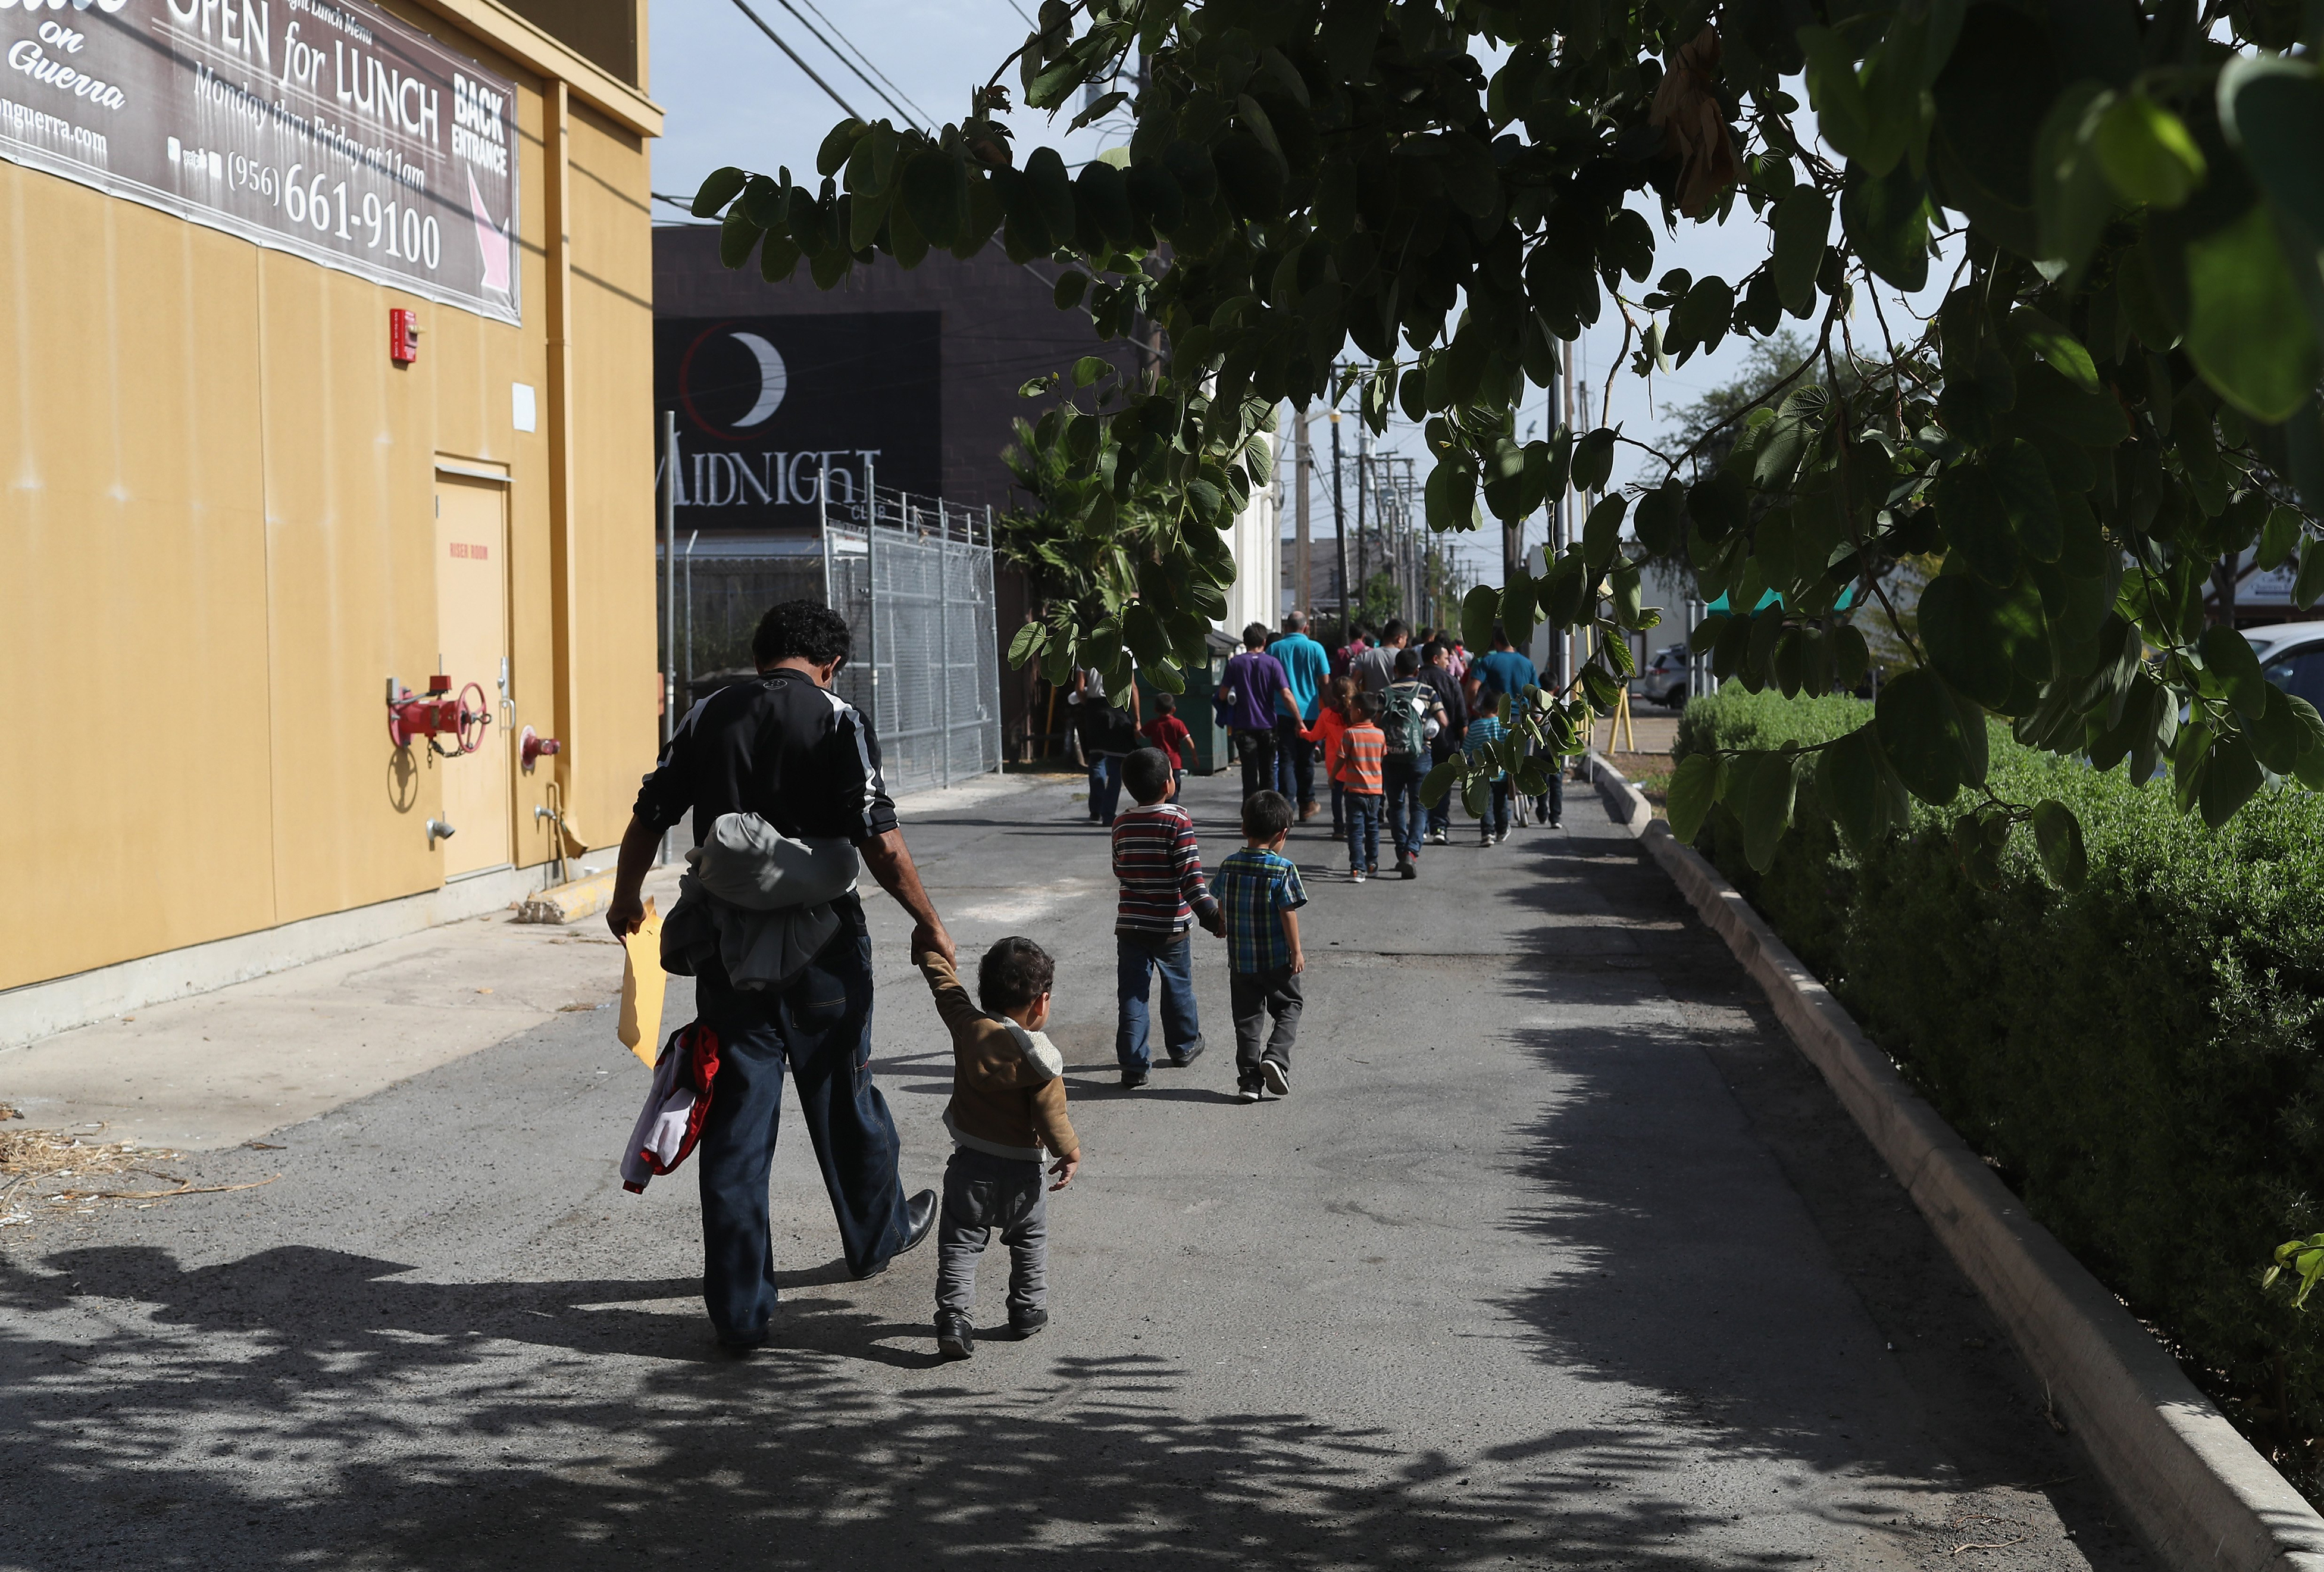 Central American immigrant families depart ICE custody, pending future immigration court hearings in McAllen, Texas on June 11, 2018. (John Moore—Getty Images)